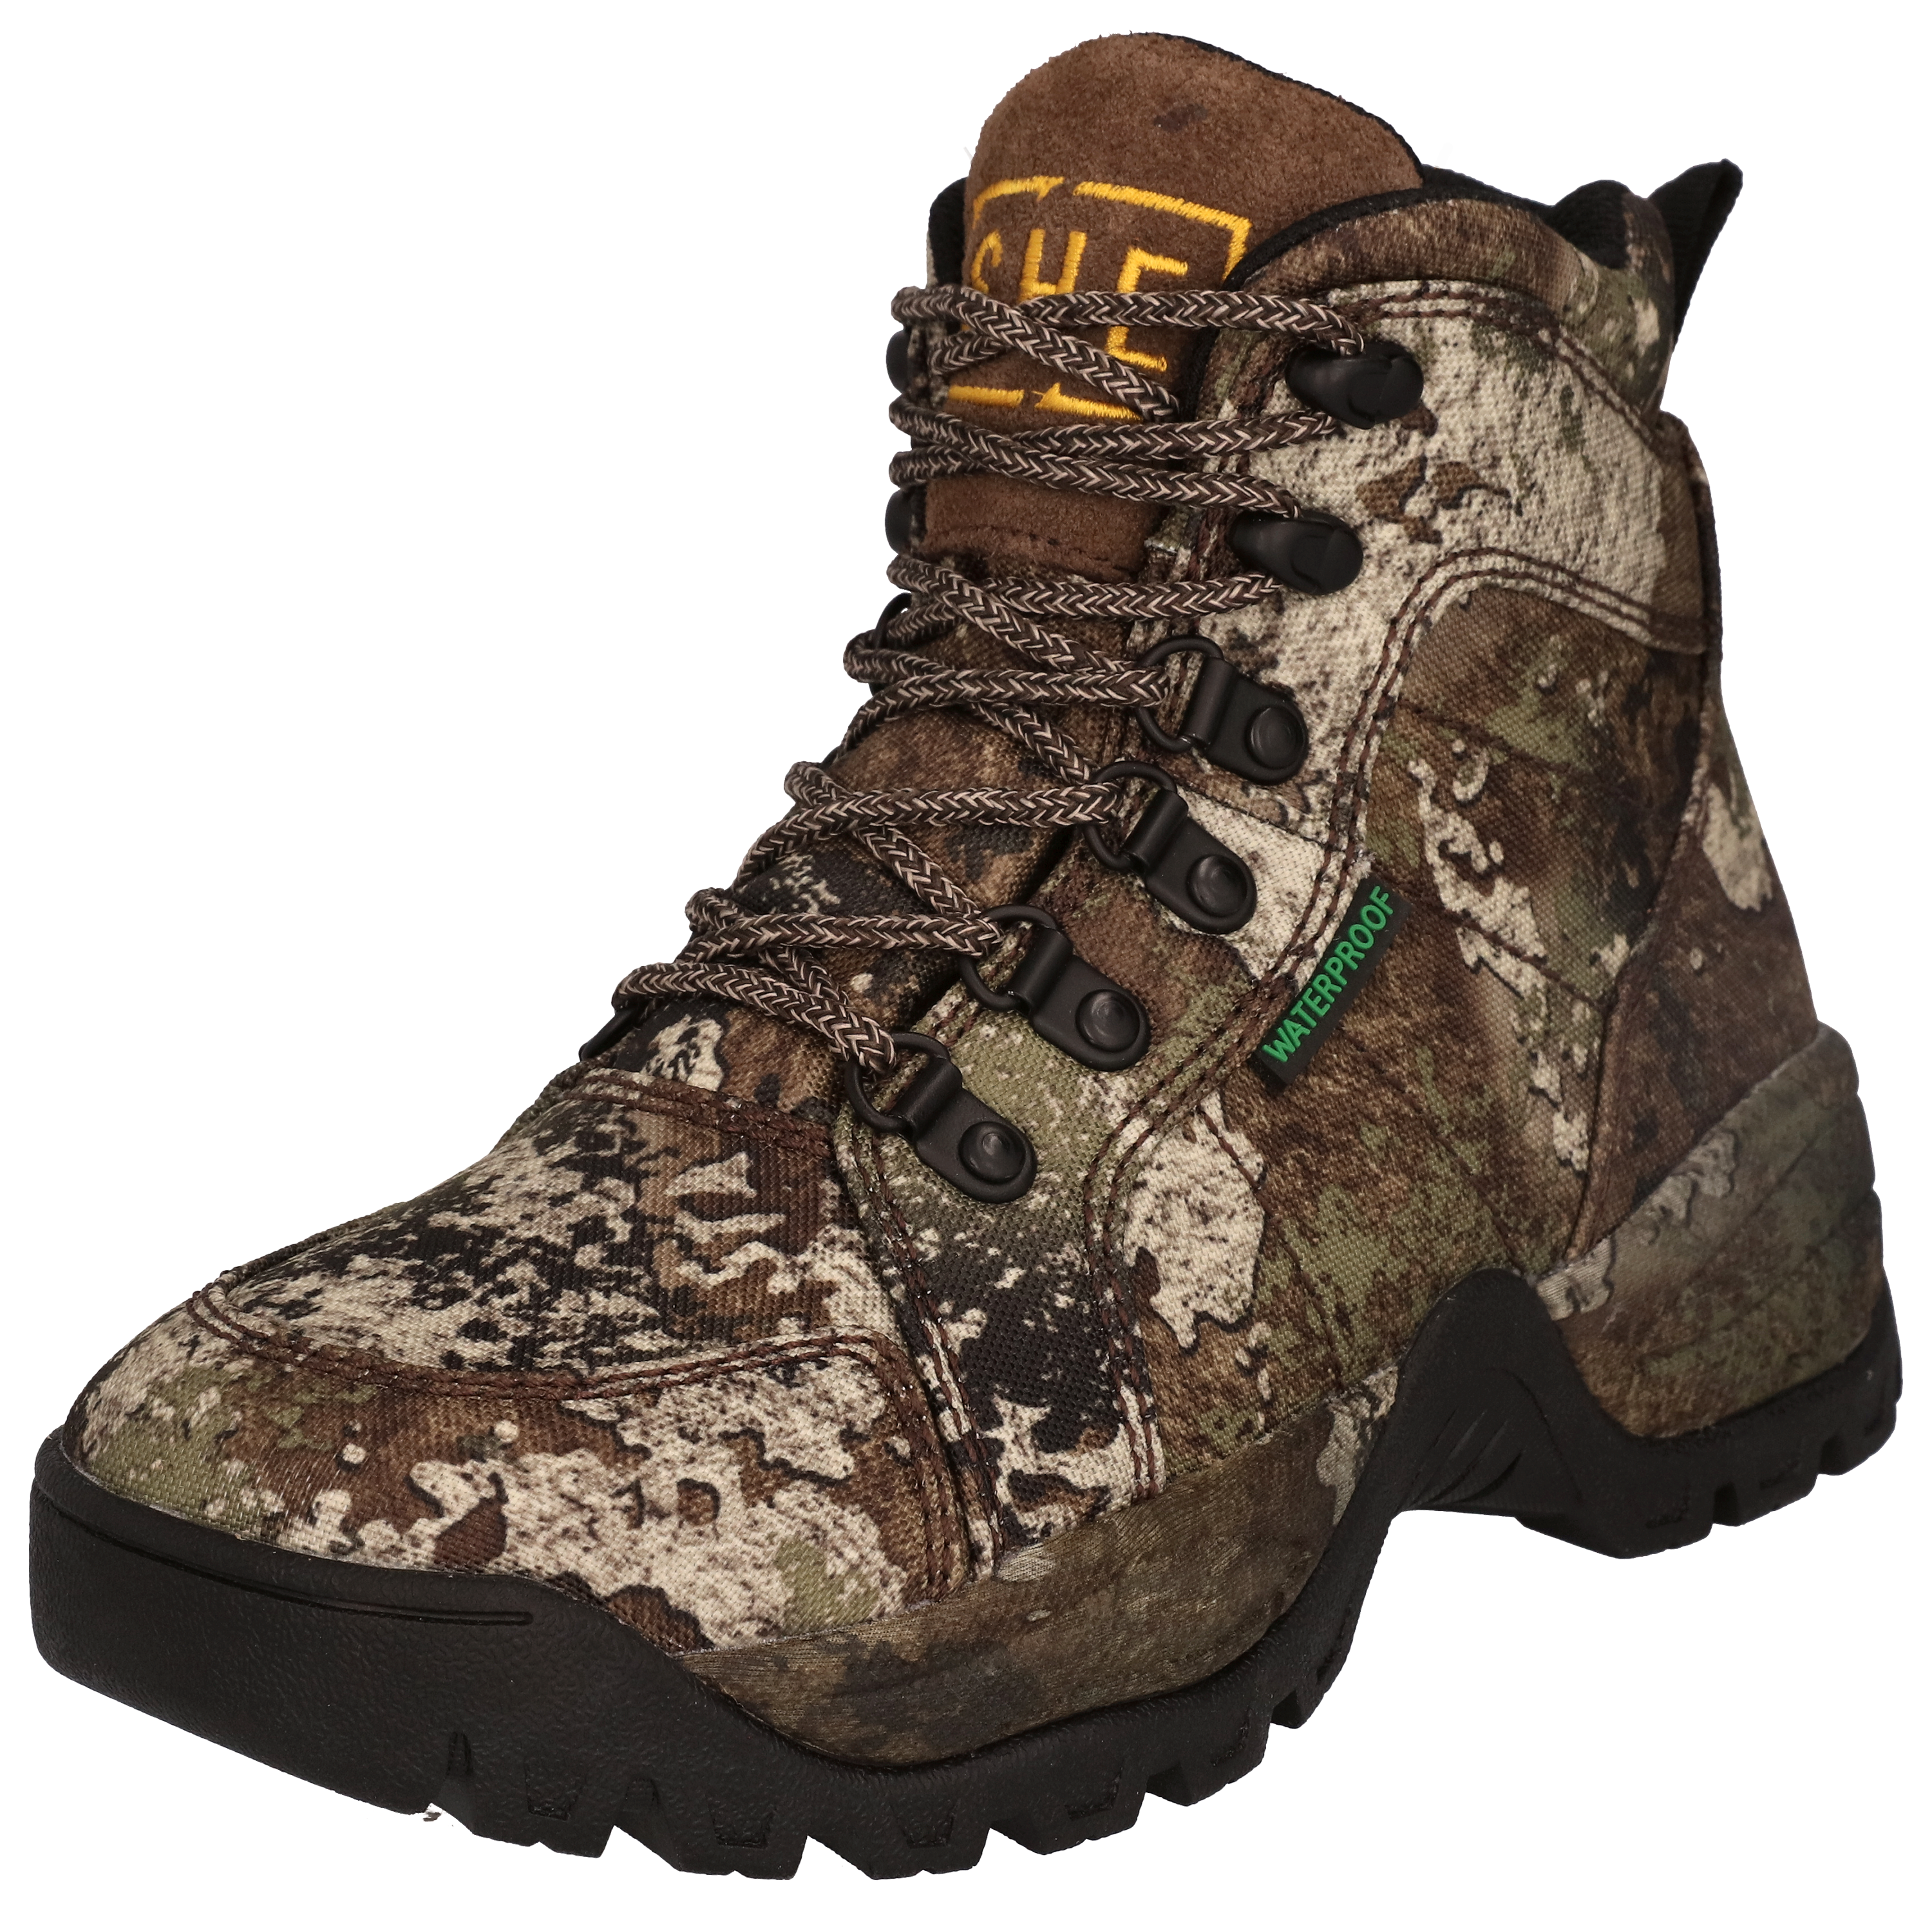 SHE Outdoor Timber Buck Waterproof Hunting Boots for Ladies - TrueTimber Strata - 6.5M